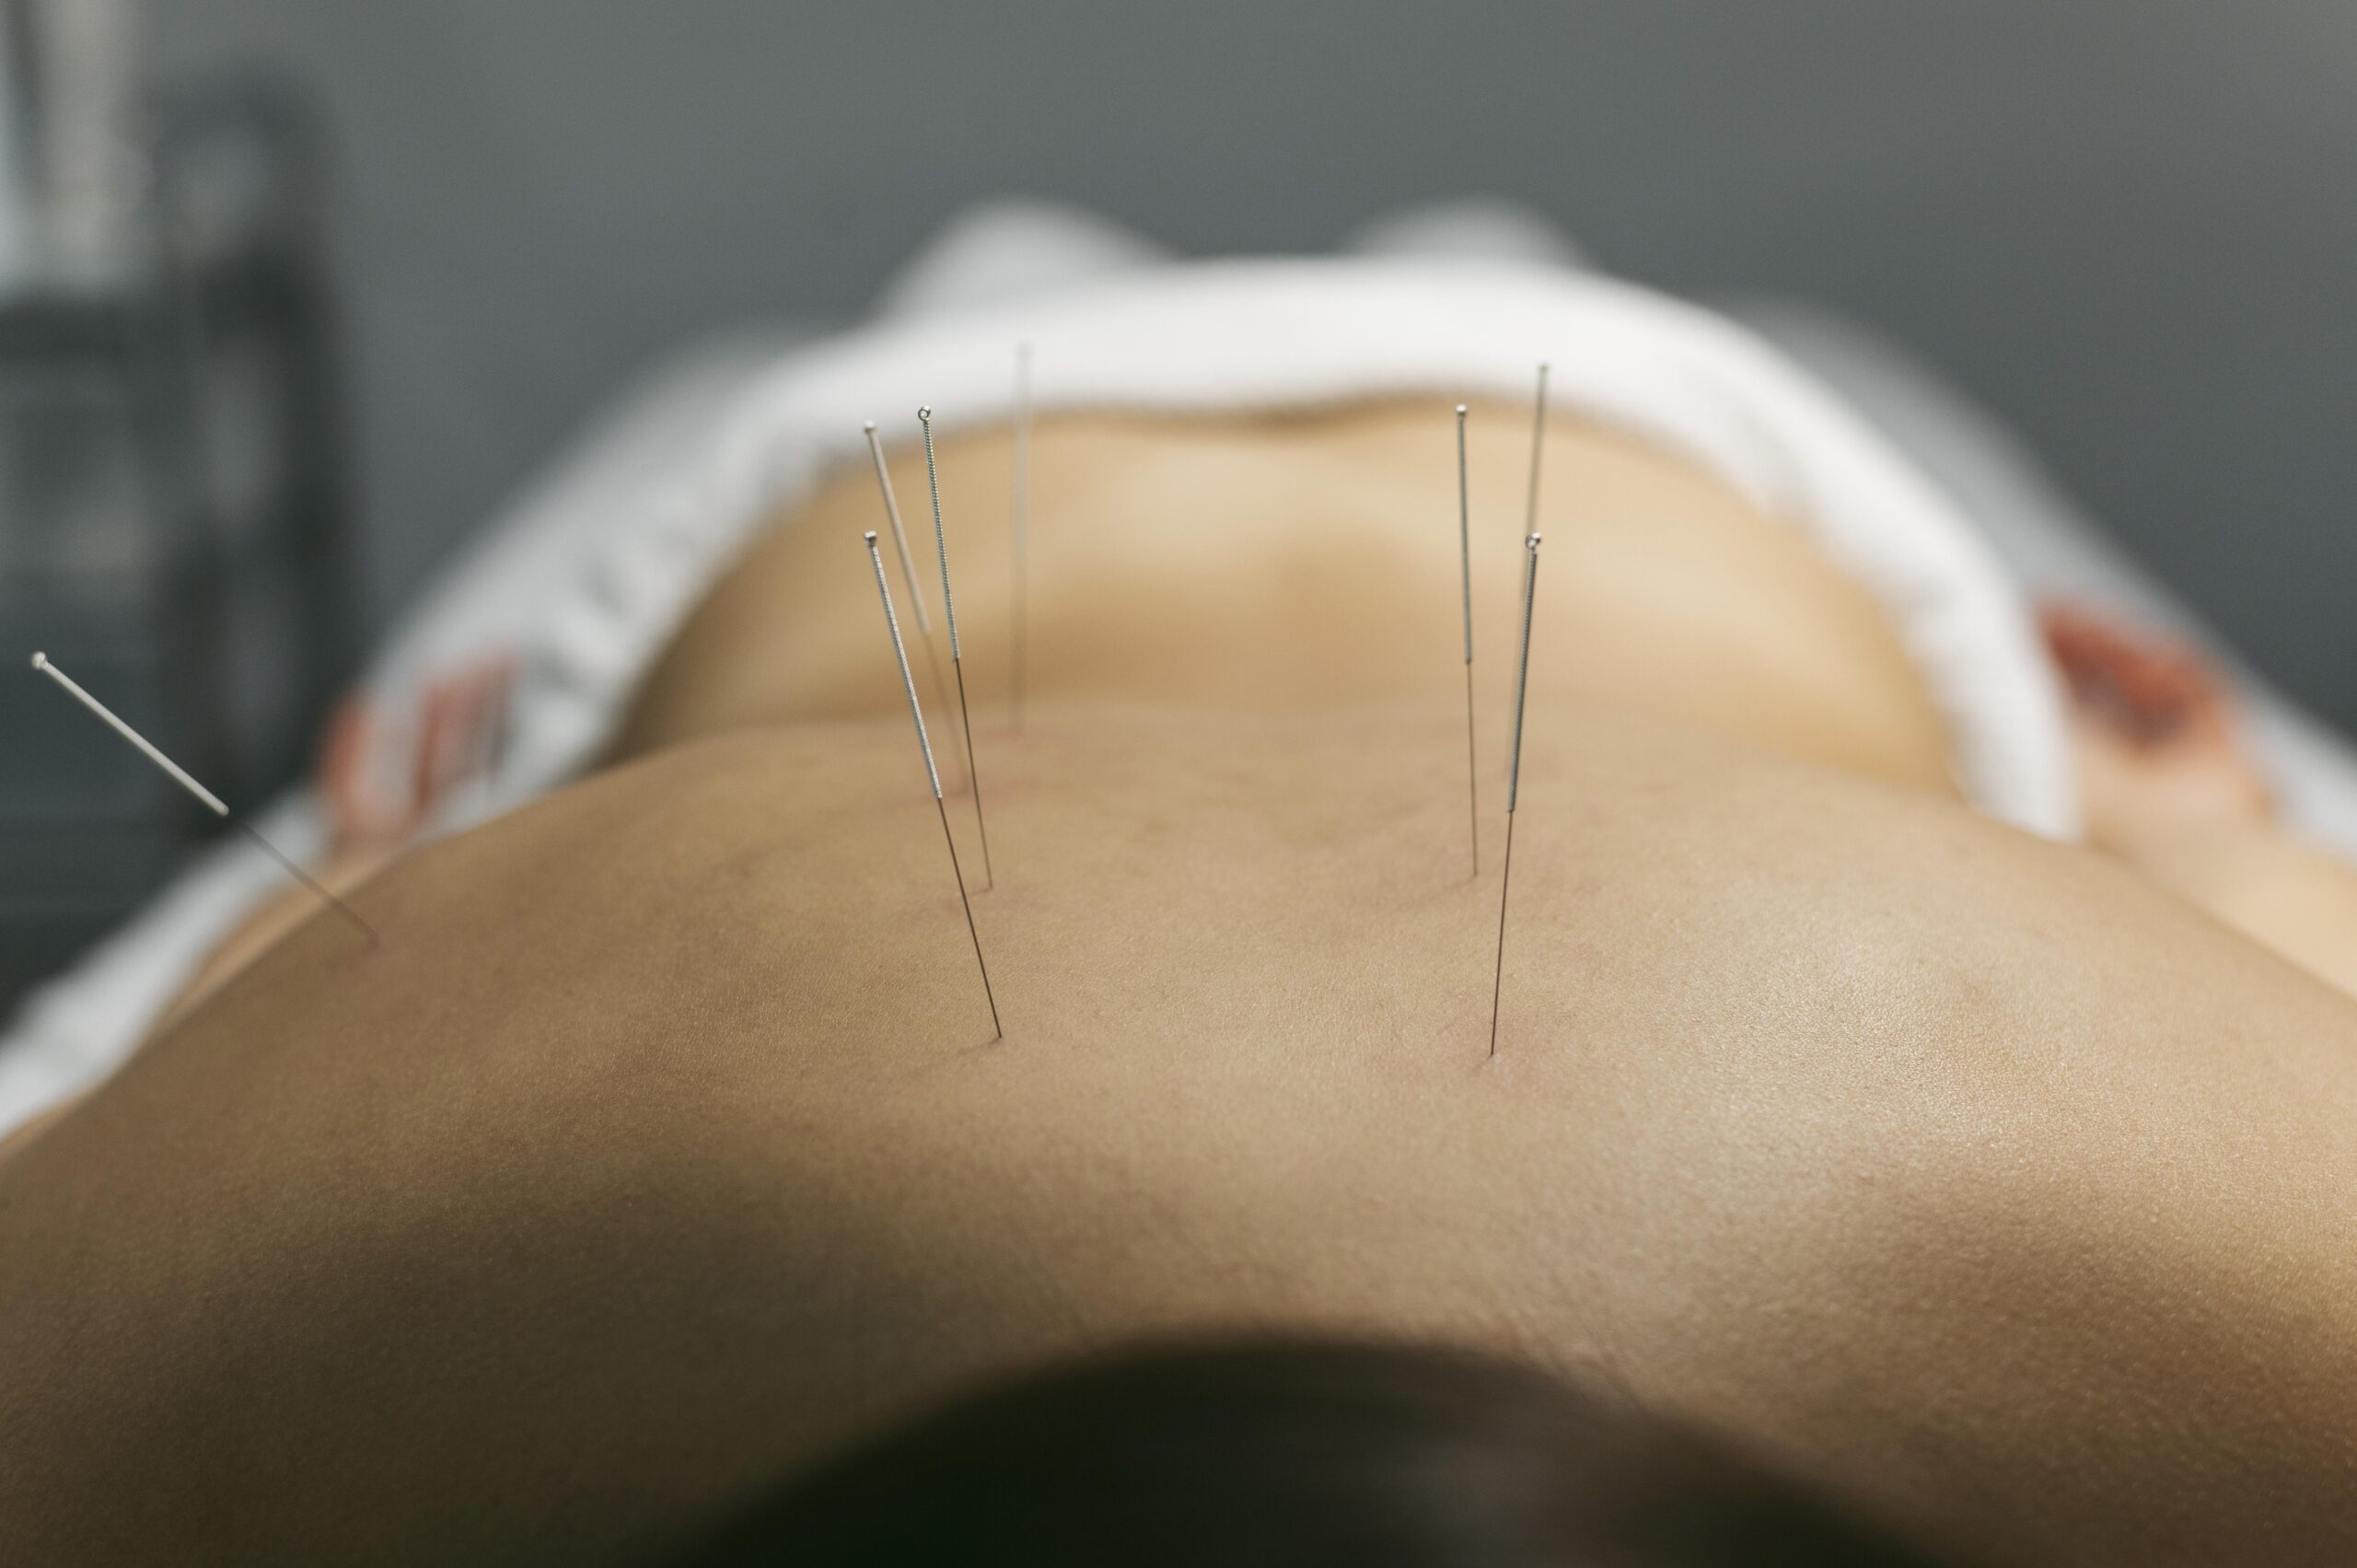 HOW TO INCORPORATE ACUPUNCTURE INTO YOUR SPIRITUAL PRACTICE FOR EMOTIONAL WELLBEING